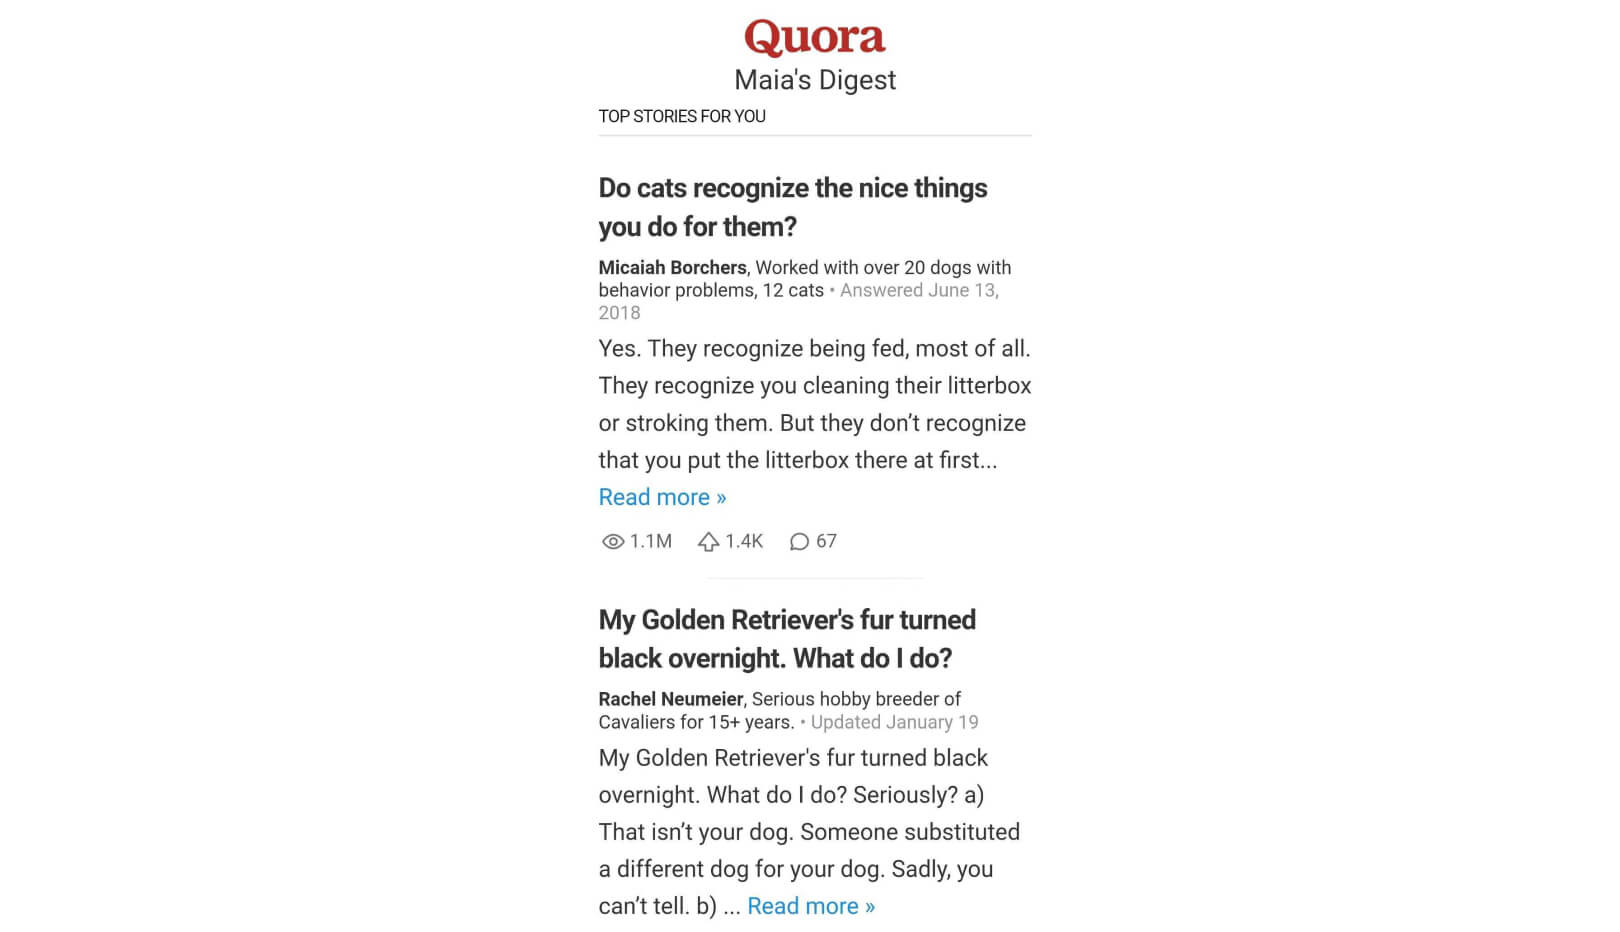 Post and Comment on Quora